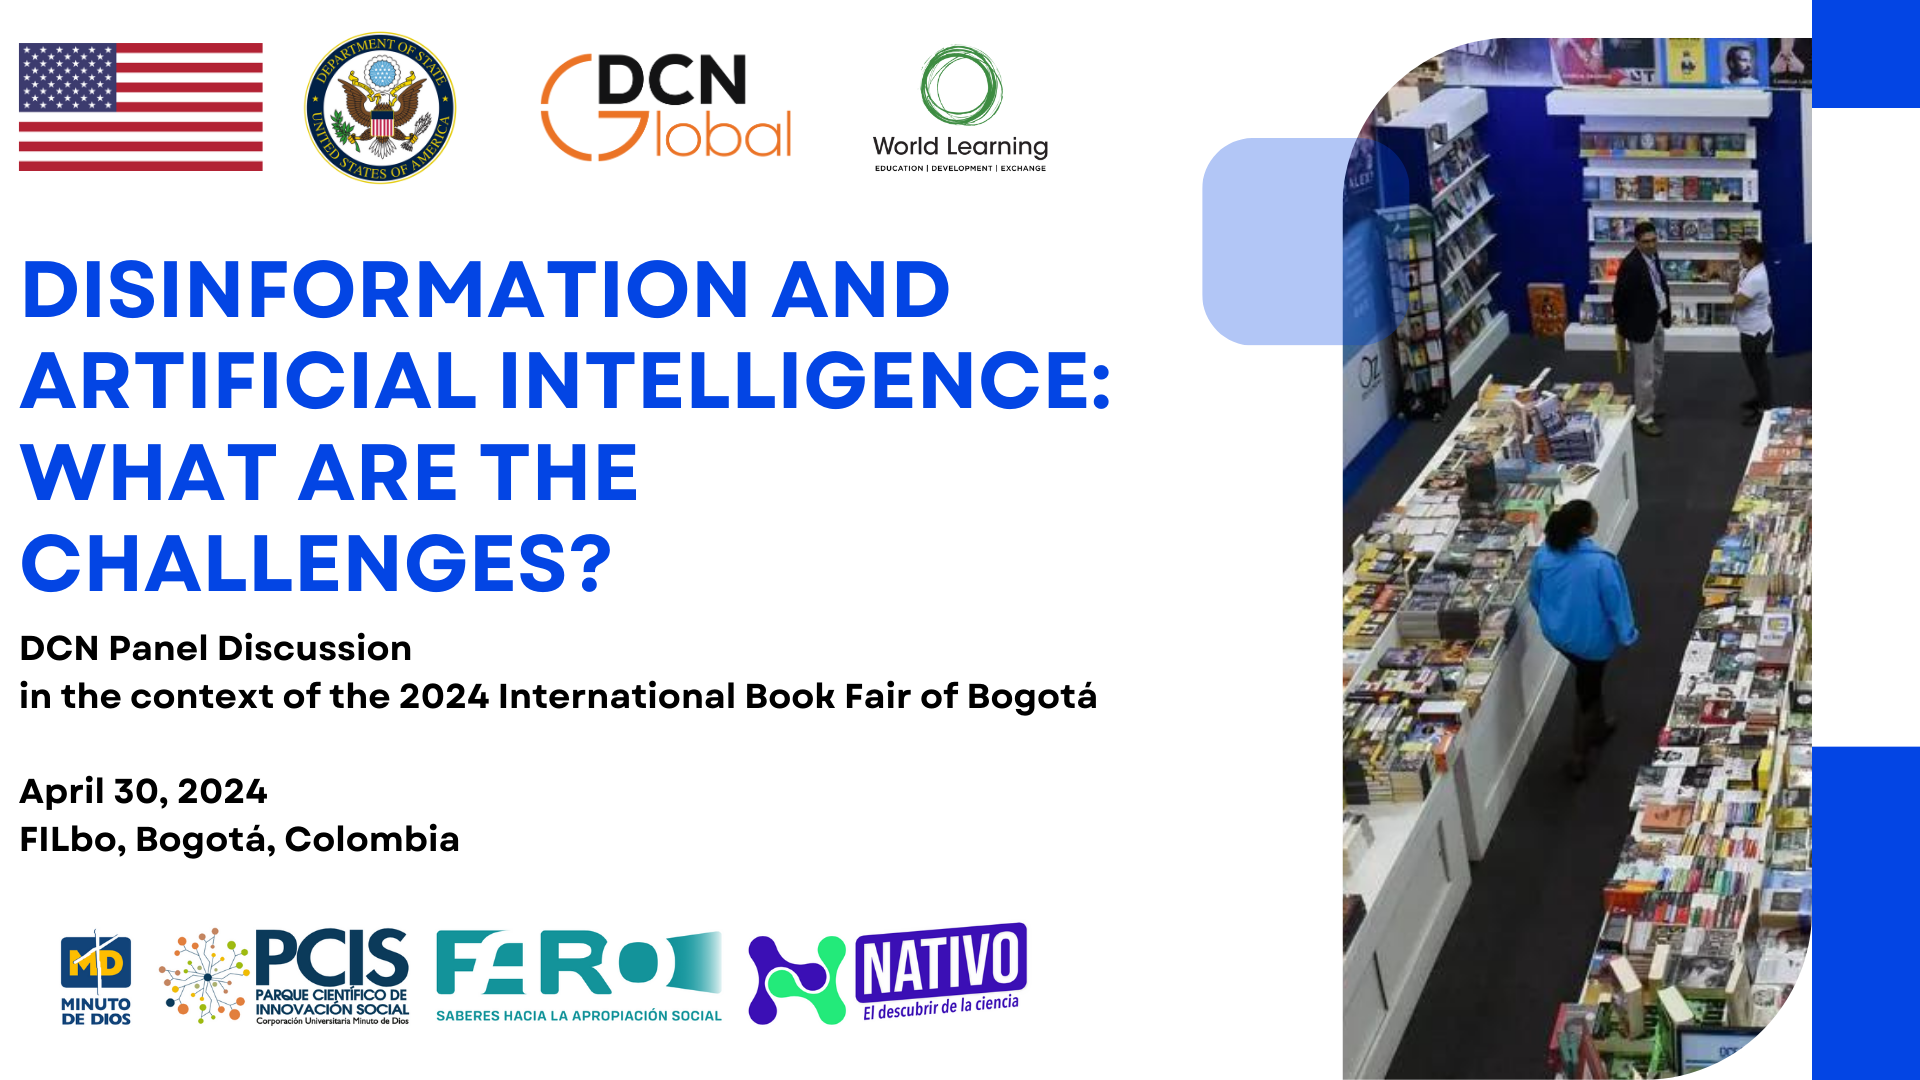 April 30: Disinformation and artificial intelligence: What are the challenges?